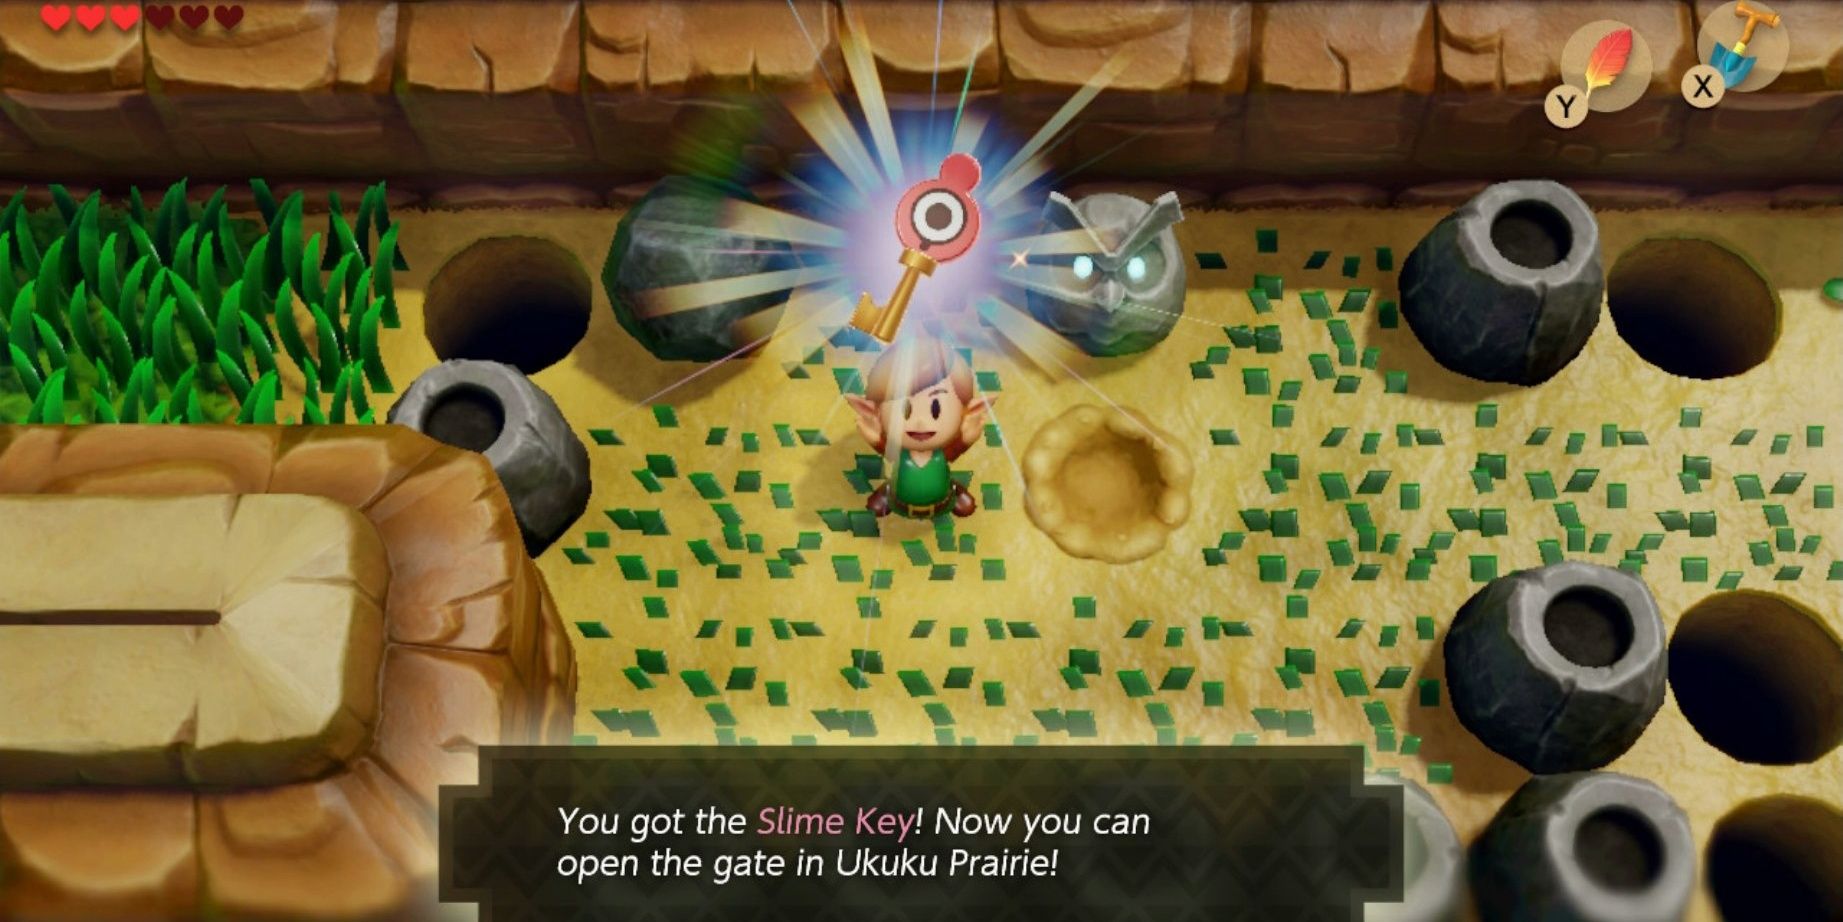 Link finds the Slime Key to Unlock the Key Cavern Dungeon in The Legend of Zelda: Link's Awakening